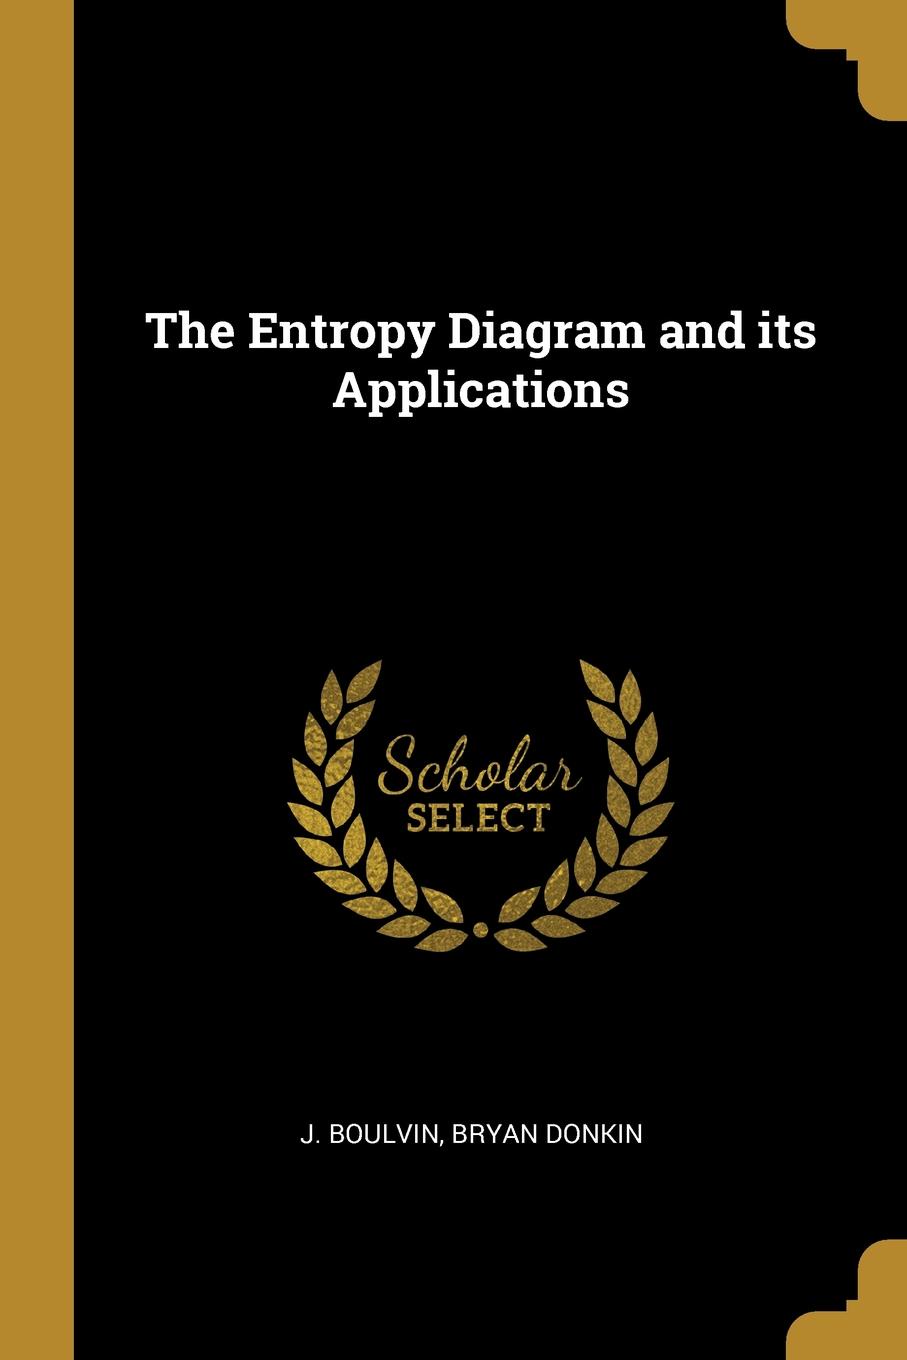 The Entropy Diagram and its Applications